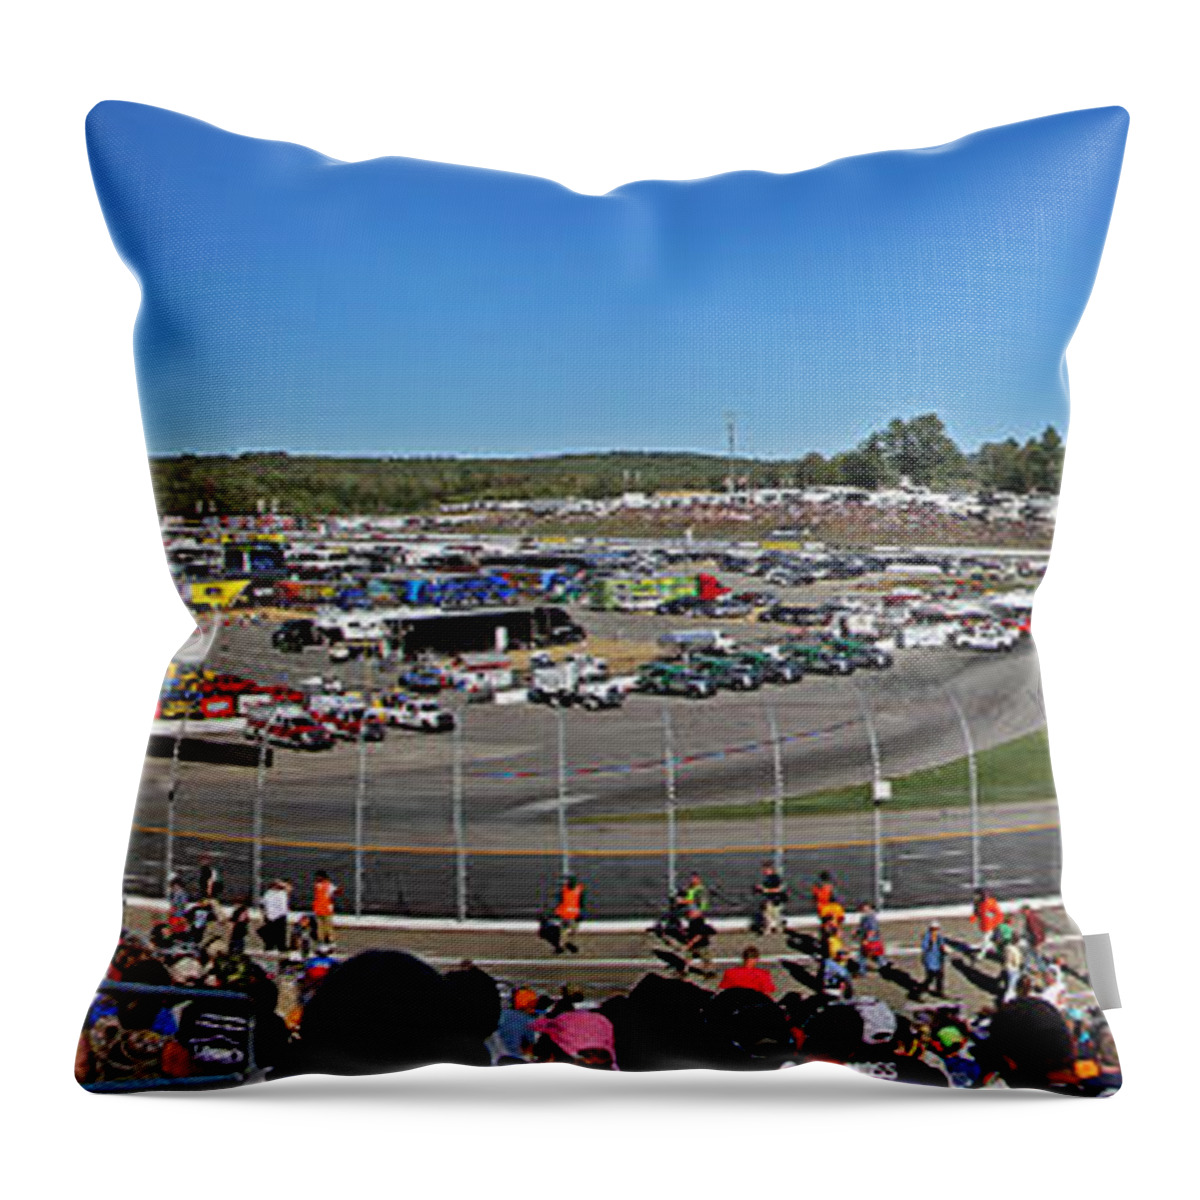 New Hampshire Motor Speedway Throw Pillow featuring the photograph New Hampshire Motor Speedway by Juergen Roth